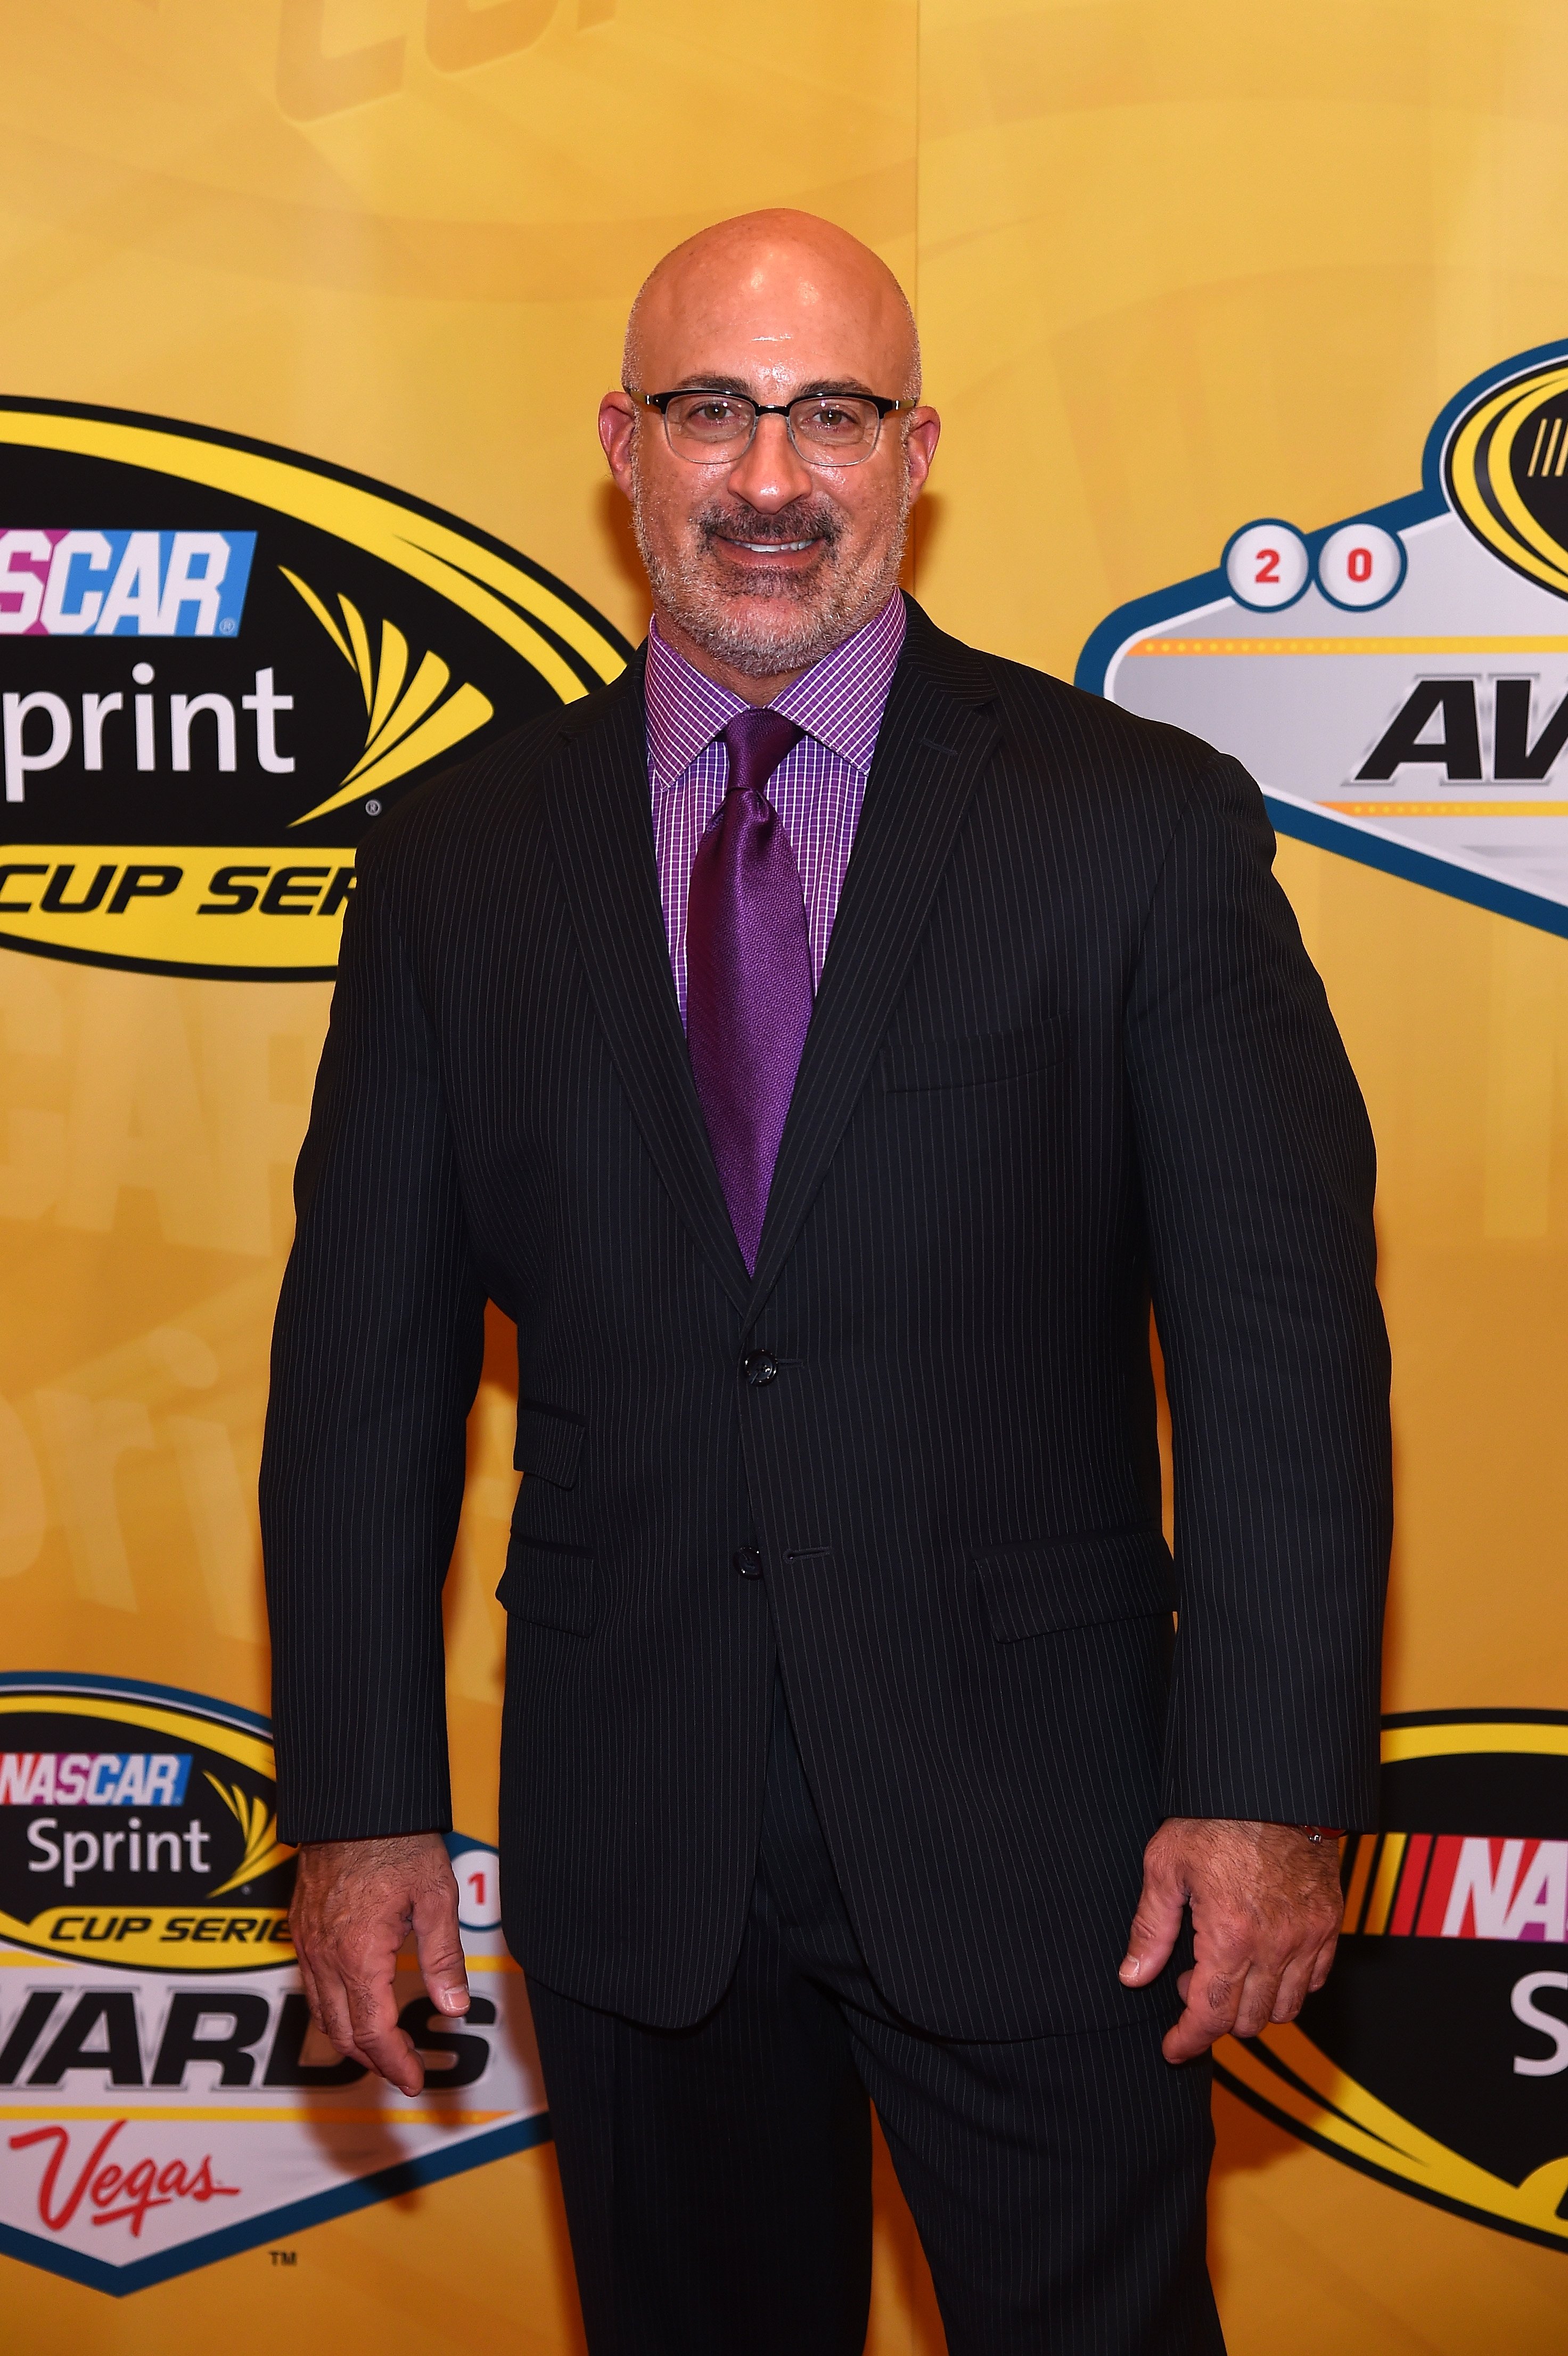 Meteorologist Jim Cantore smiles for a photo on the red carpet at the NASCAR Sprint Cup Series Awards